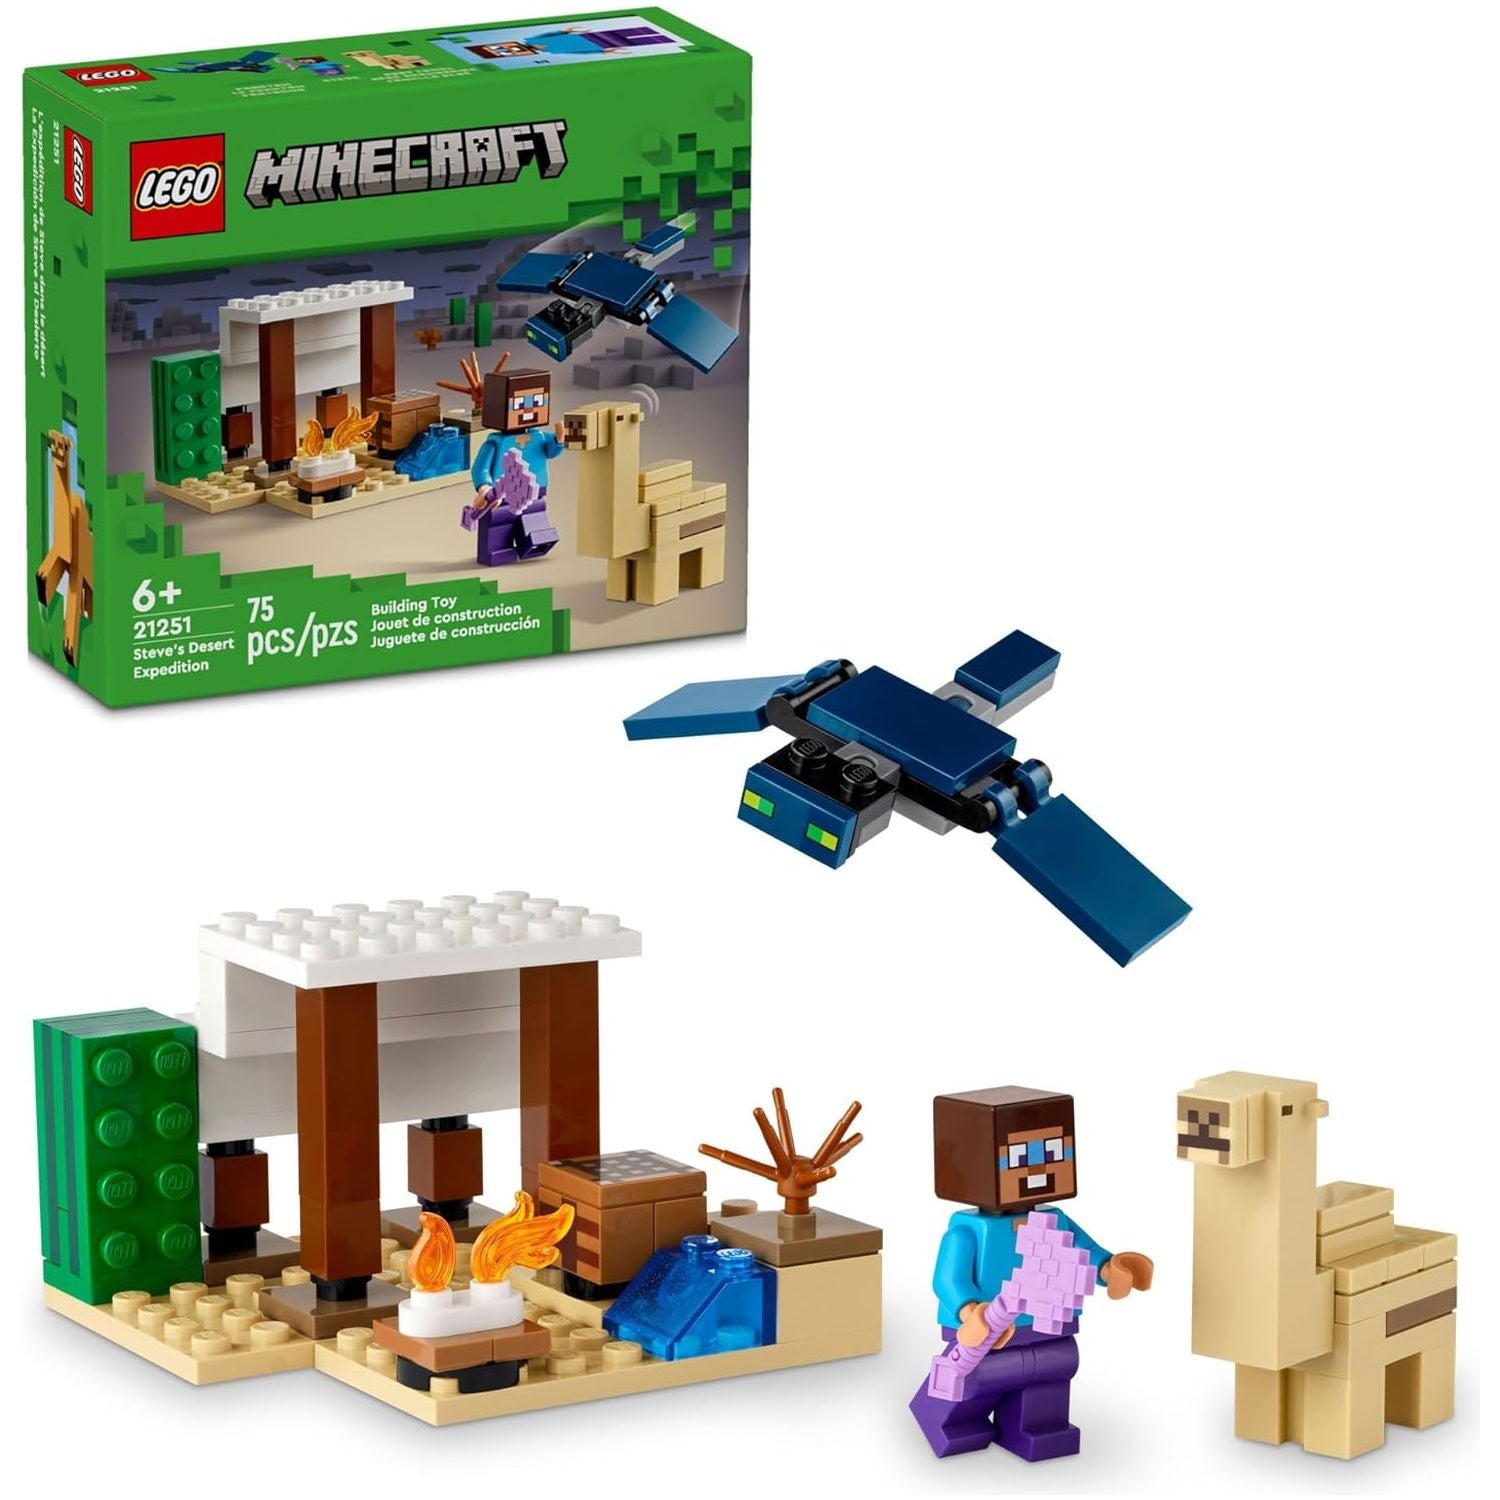 LEGO 21251 Minecraft Steve's Desert Expedition Building Toy, Biome with Minecraft House and Action Figures, Minecraft Gift for Independent Play.